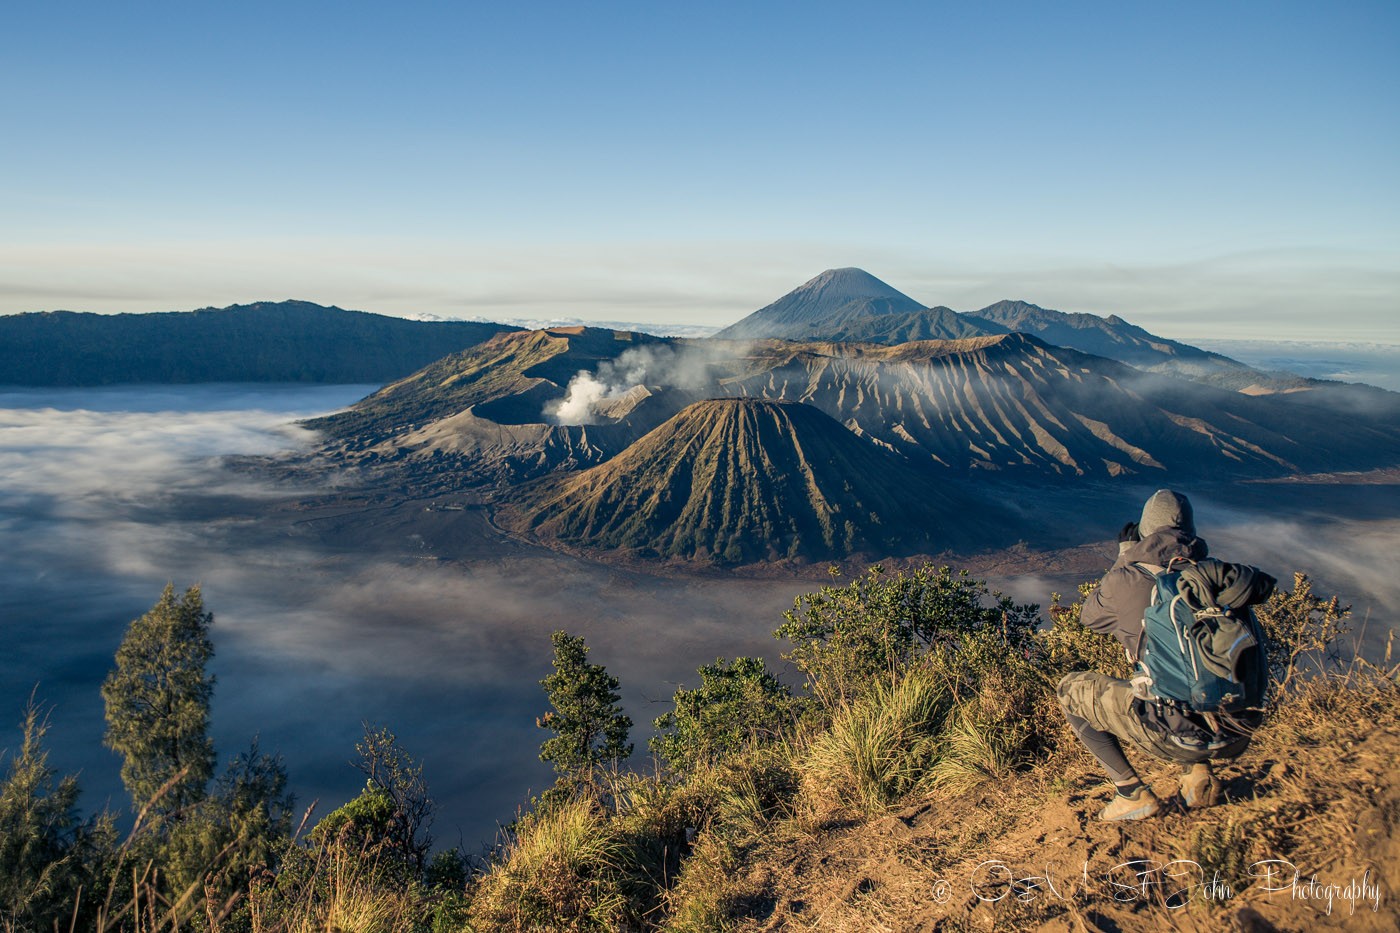 Max taking a photo of Mt Bromo. Indonesia